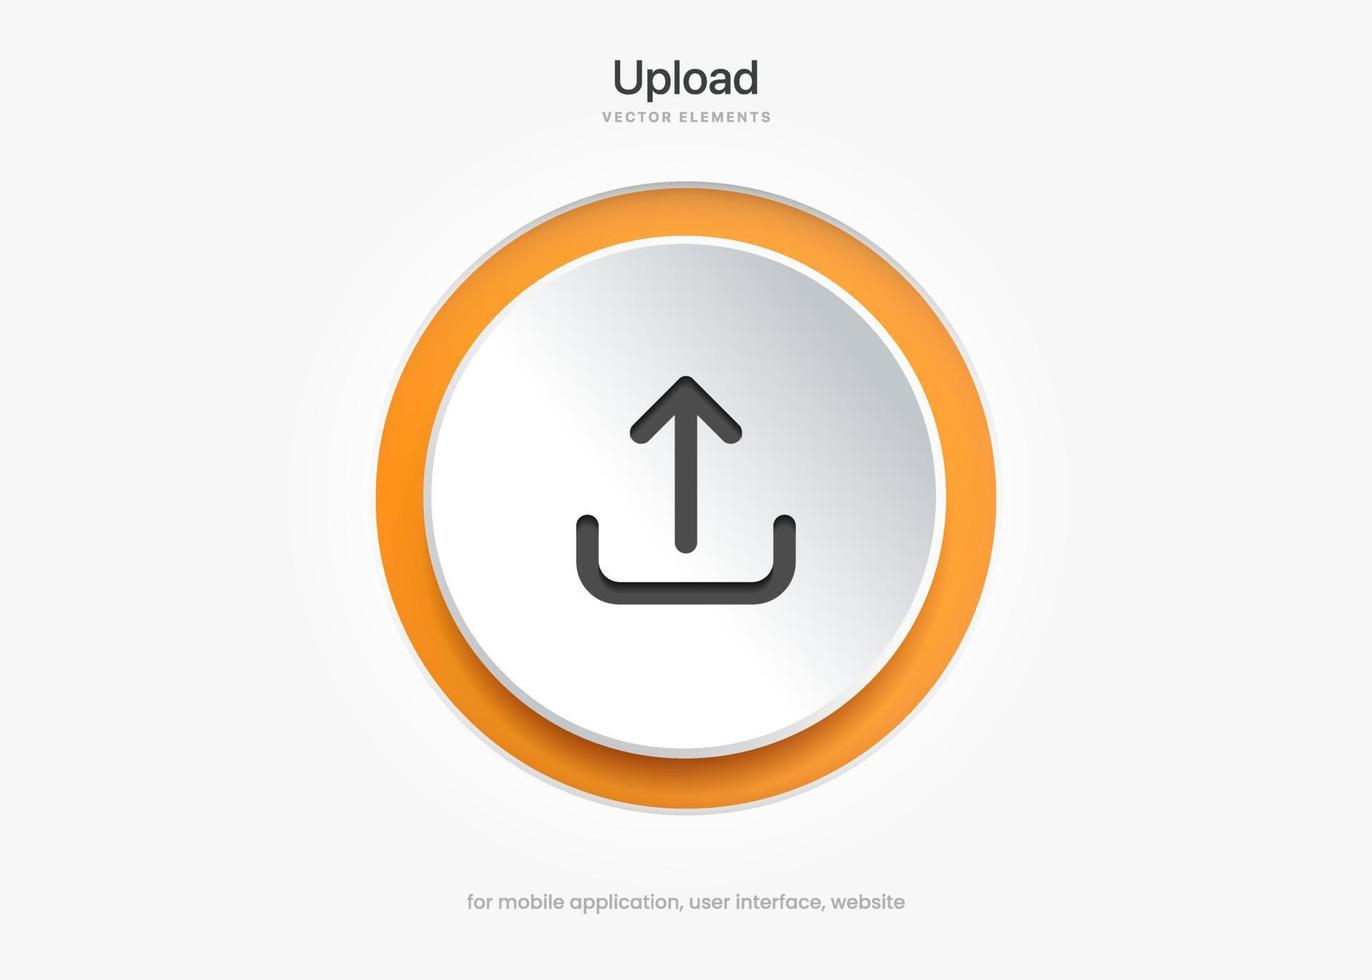 3D orange upload download button icon. Upload icon. Down arrow bottom side symbol. Click here button. Save cloud icon push button for UI UX, website, mobile application. vector